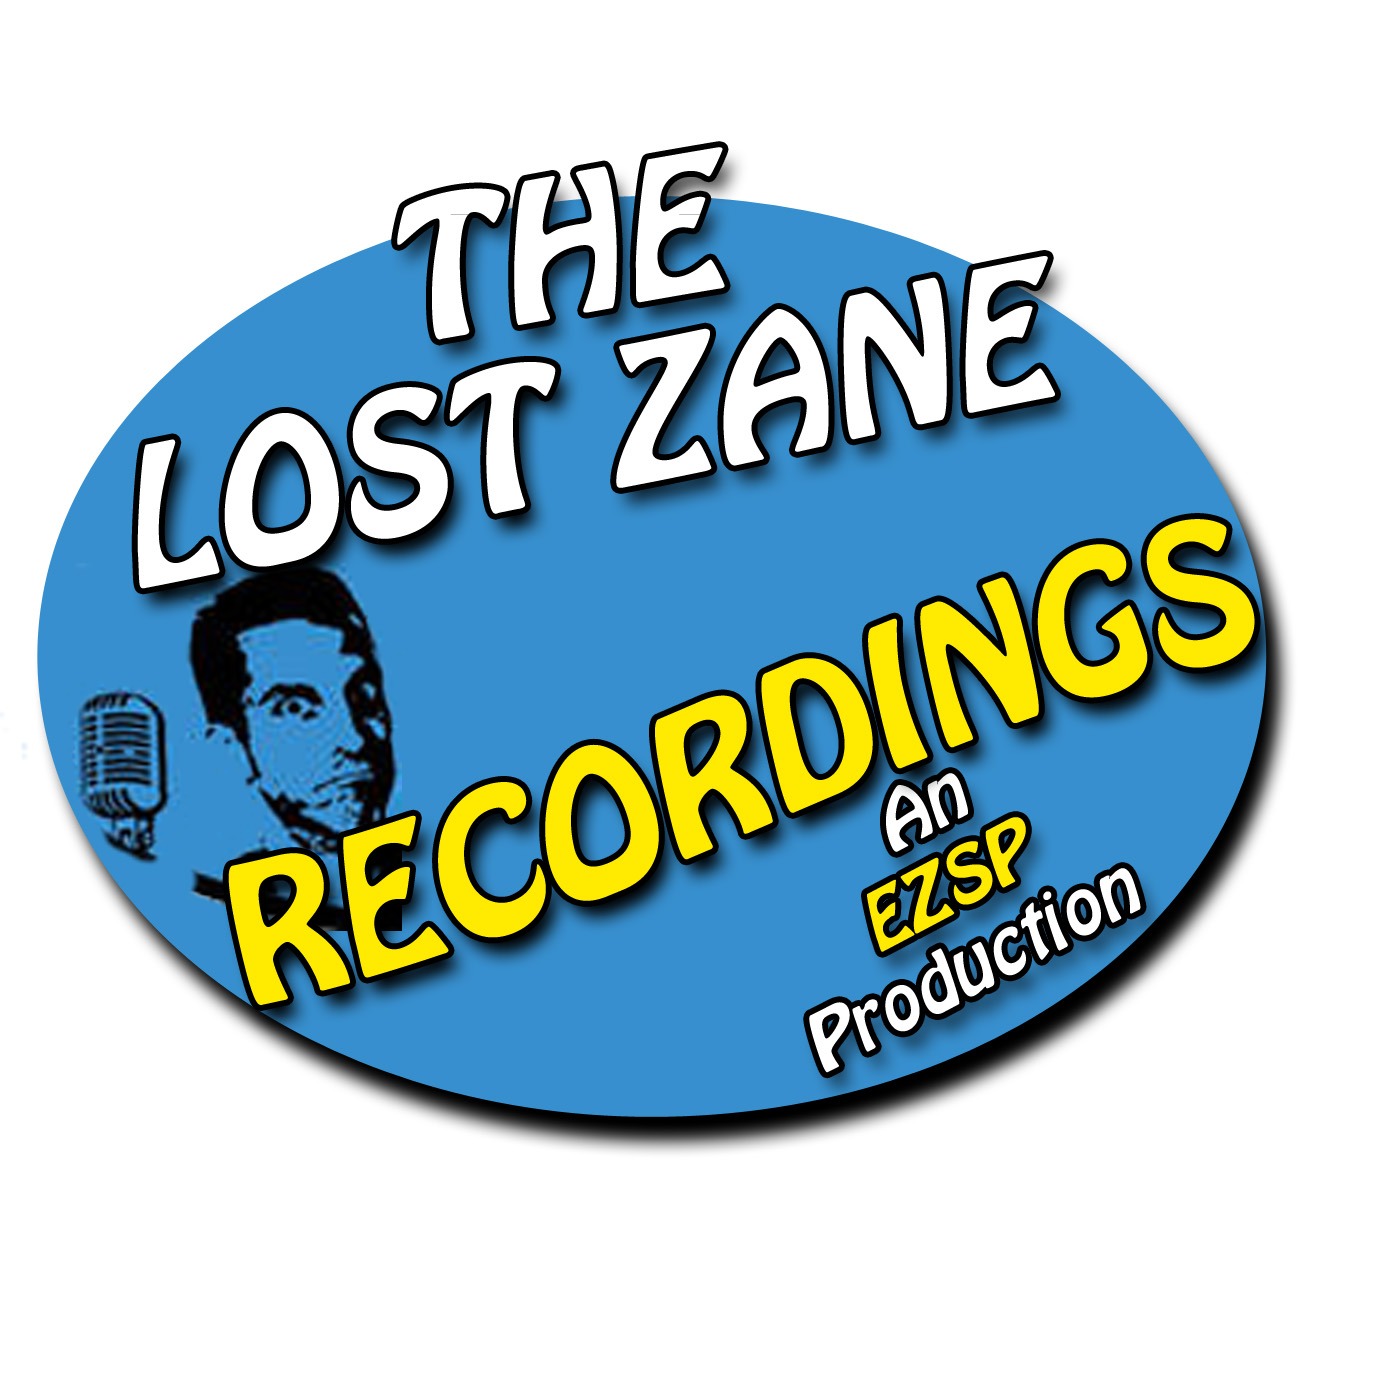 Lost Zane Recordings Highlight ~ A breakthrough in penis transplant surgery